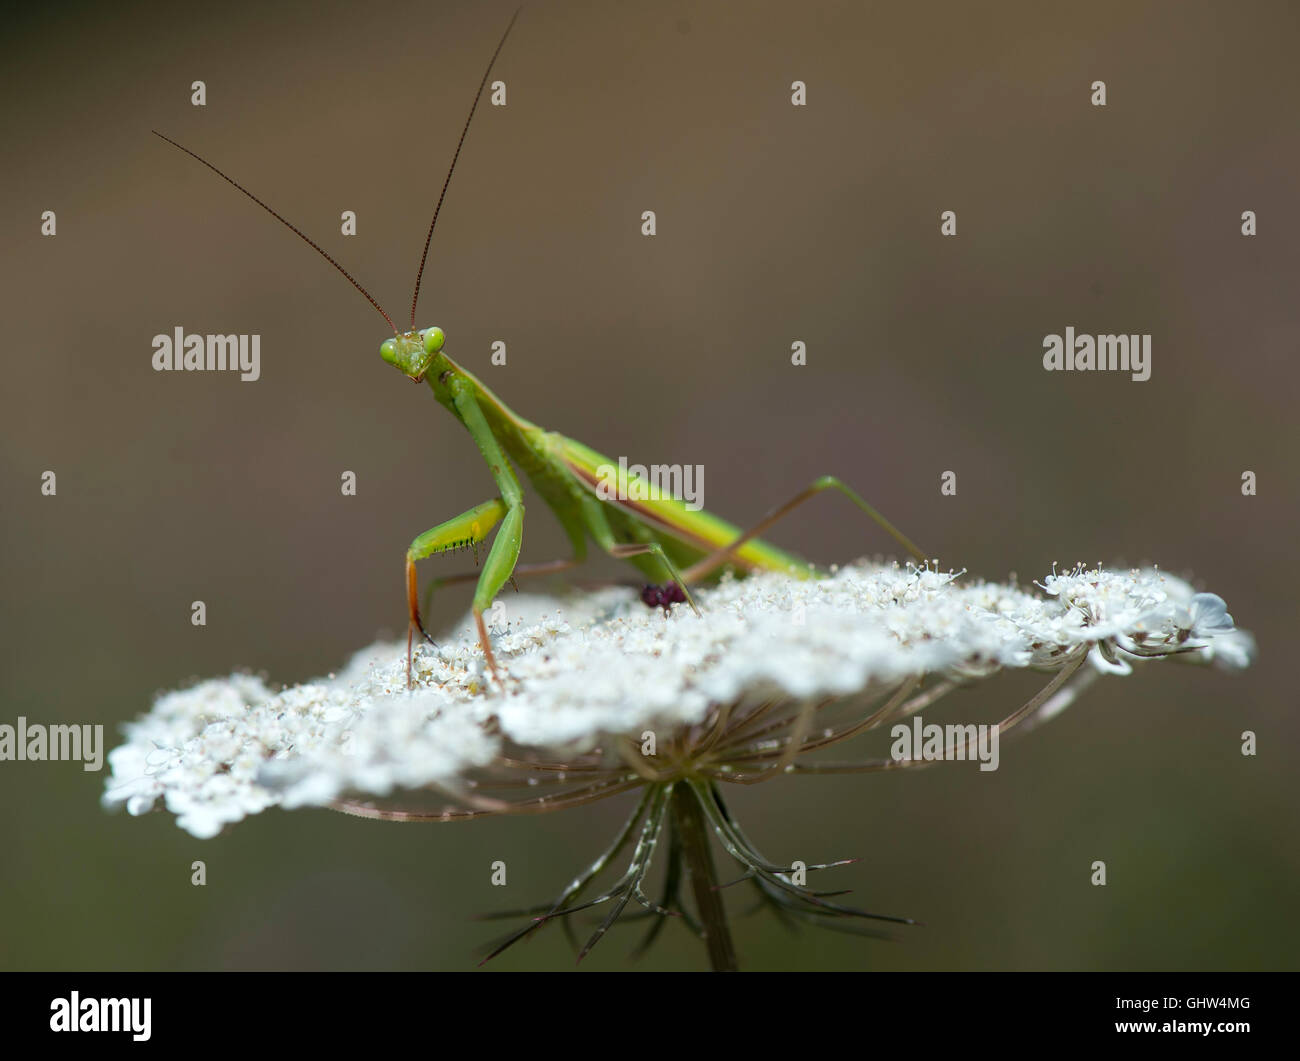 Roseburg, Oregon, USA. 11th Aug, 2016. A mantis clings to a Queen Anne's lace flower on a hillside near Roseburg in southwestern Oregon. Commonly known as the praying mantis, mantises are distributed worldwide in temperate and tropical habitats. © Robin Loznak/ZUMA Wire/Alamy Live News Stock Photo